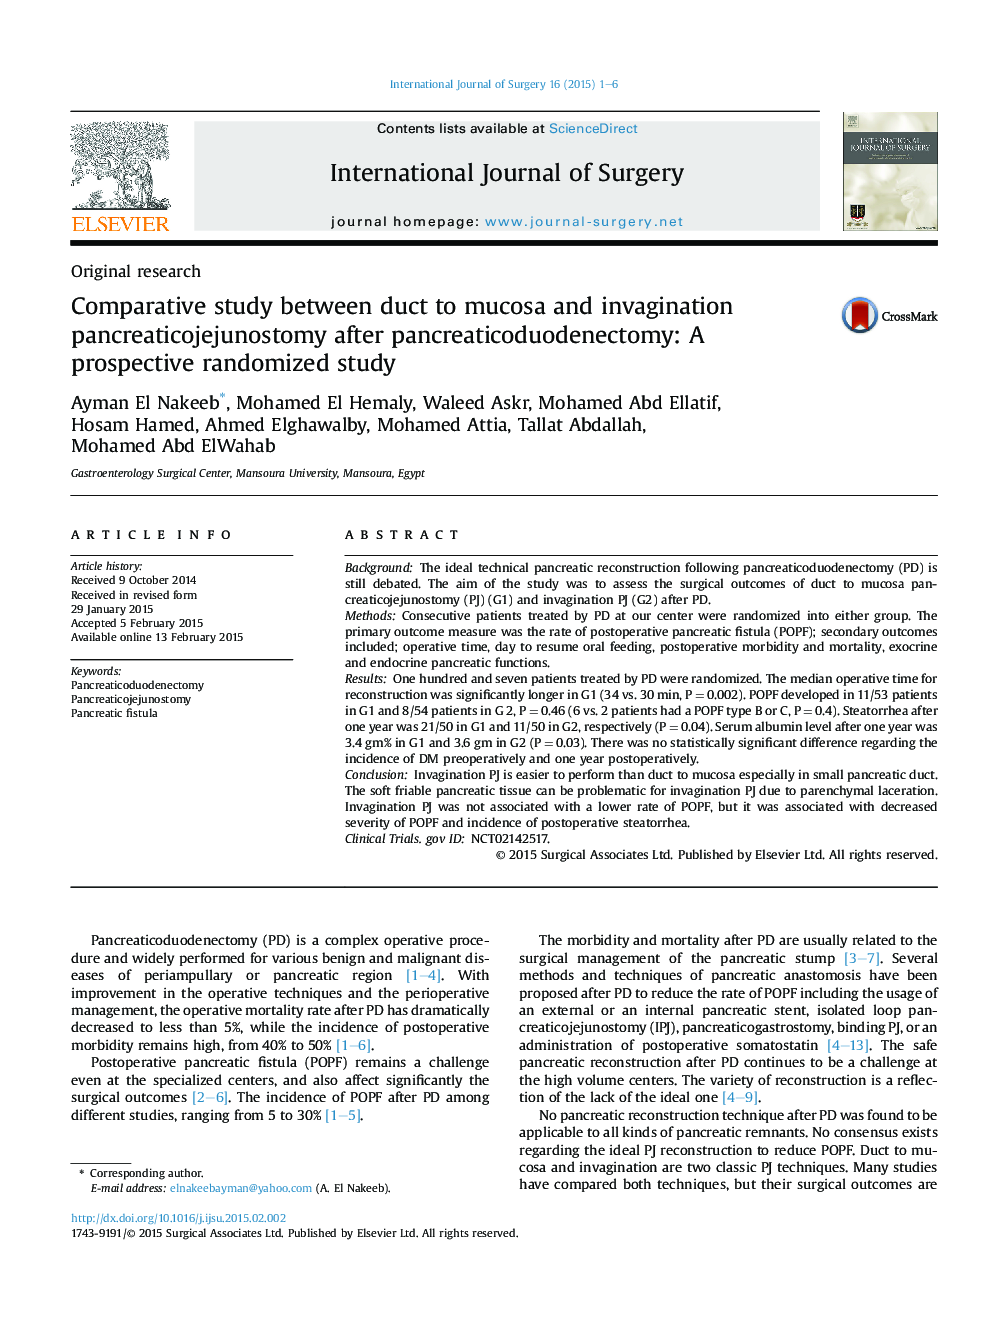 Comparative study between duct to mucosa and invagination pancreaticojejunostomy after pancreaticoduodenectomy: A prospective randomized study